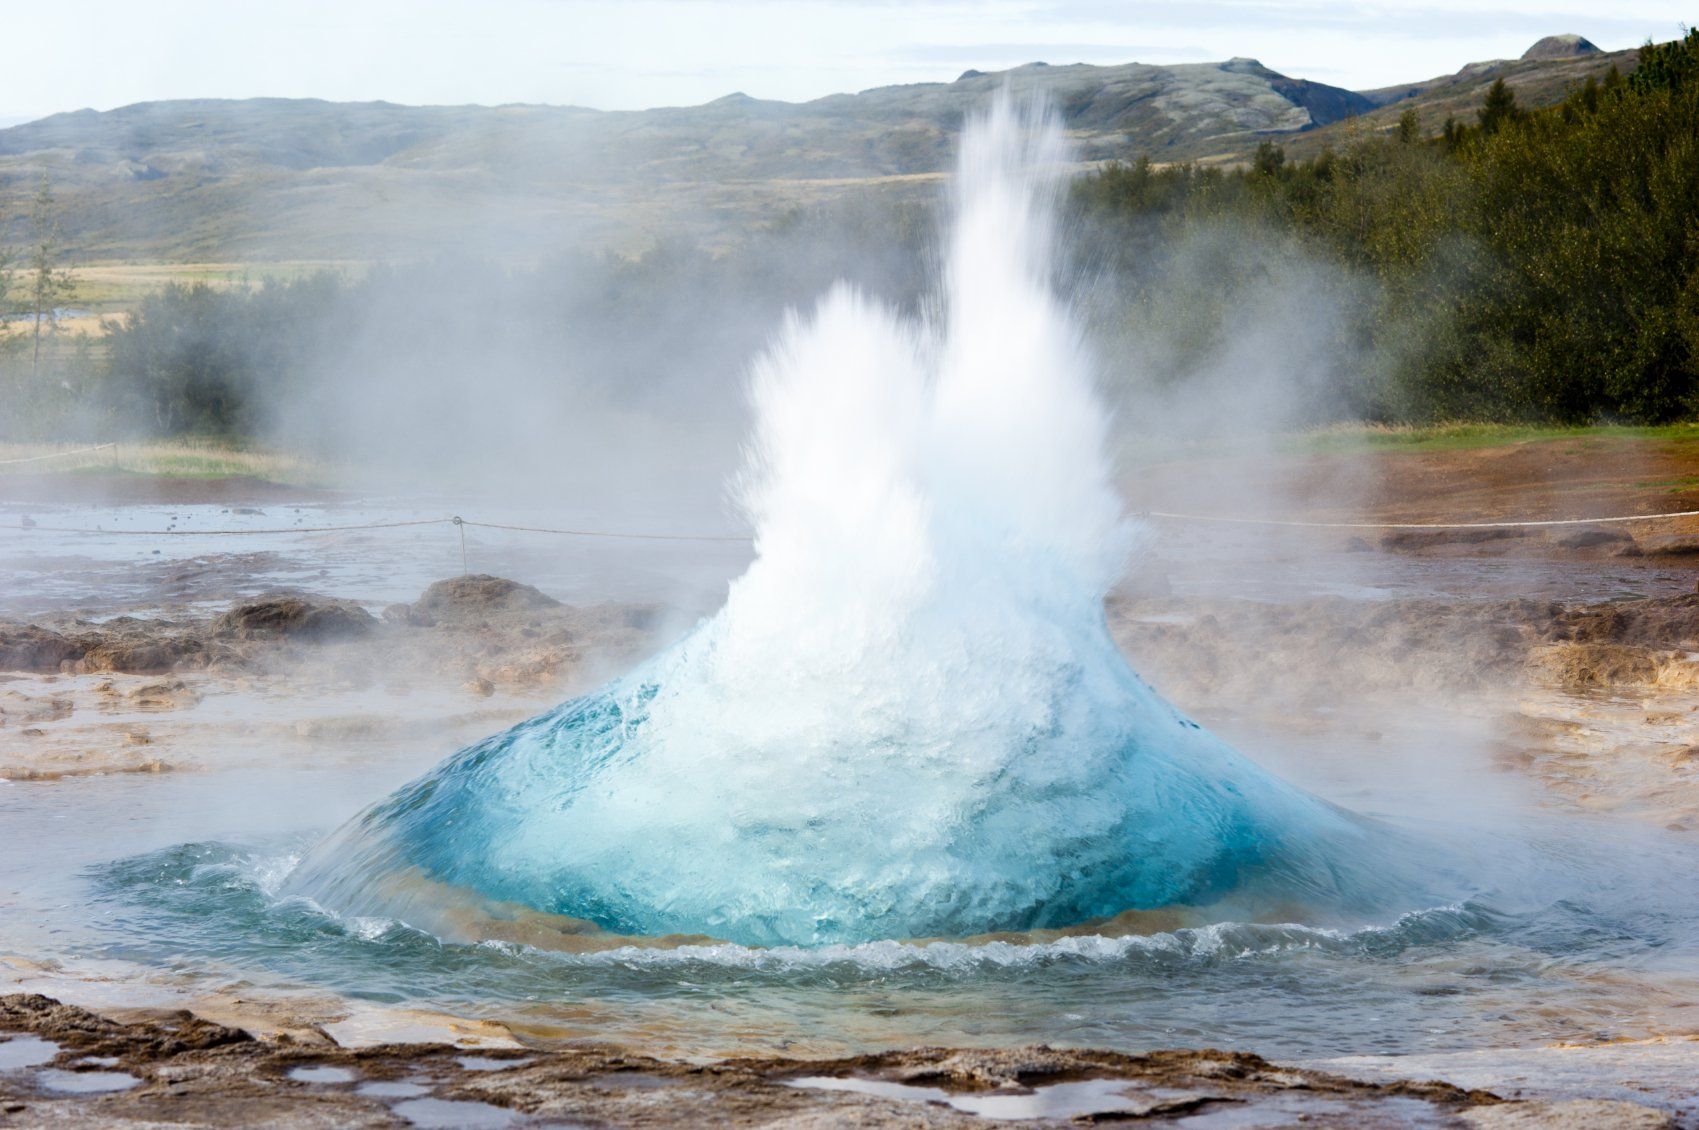 A bubbling, blue and white geyser